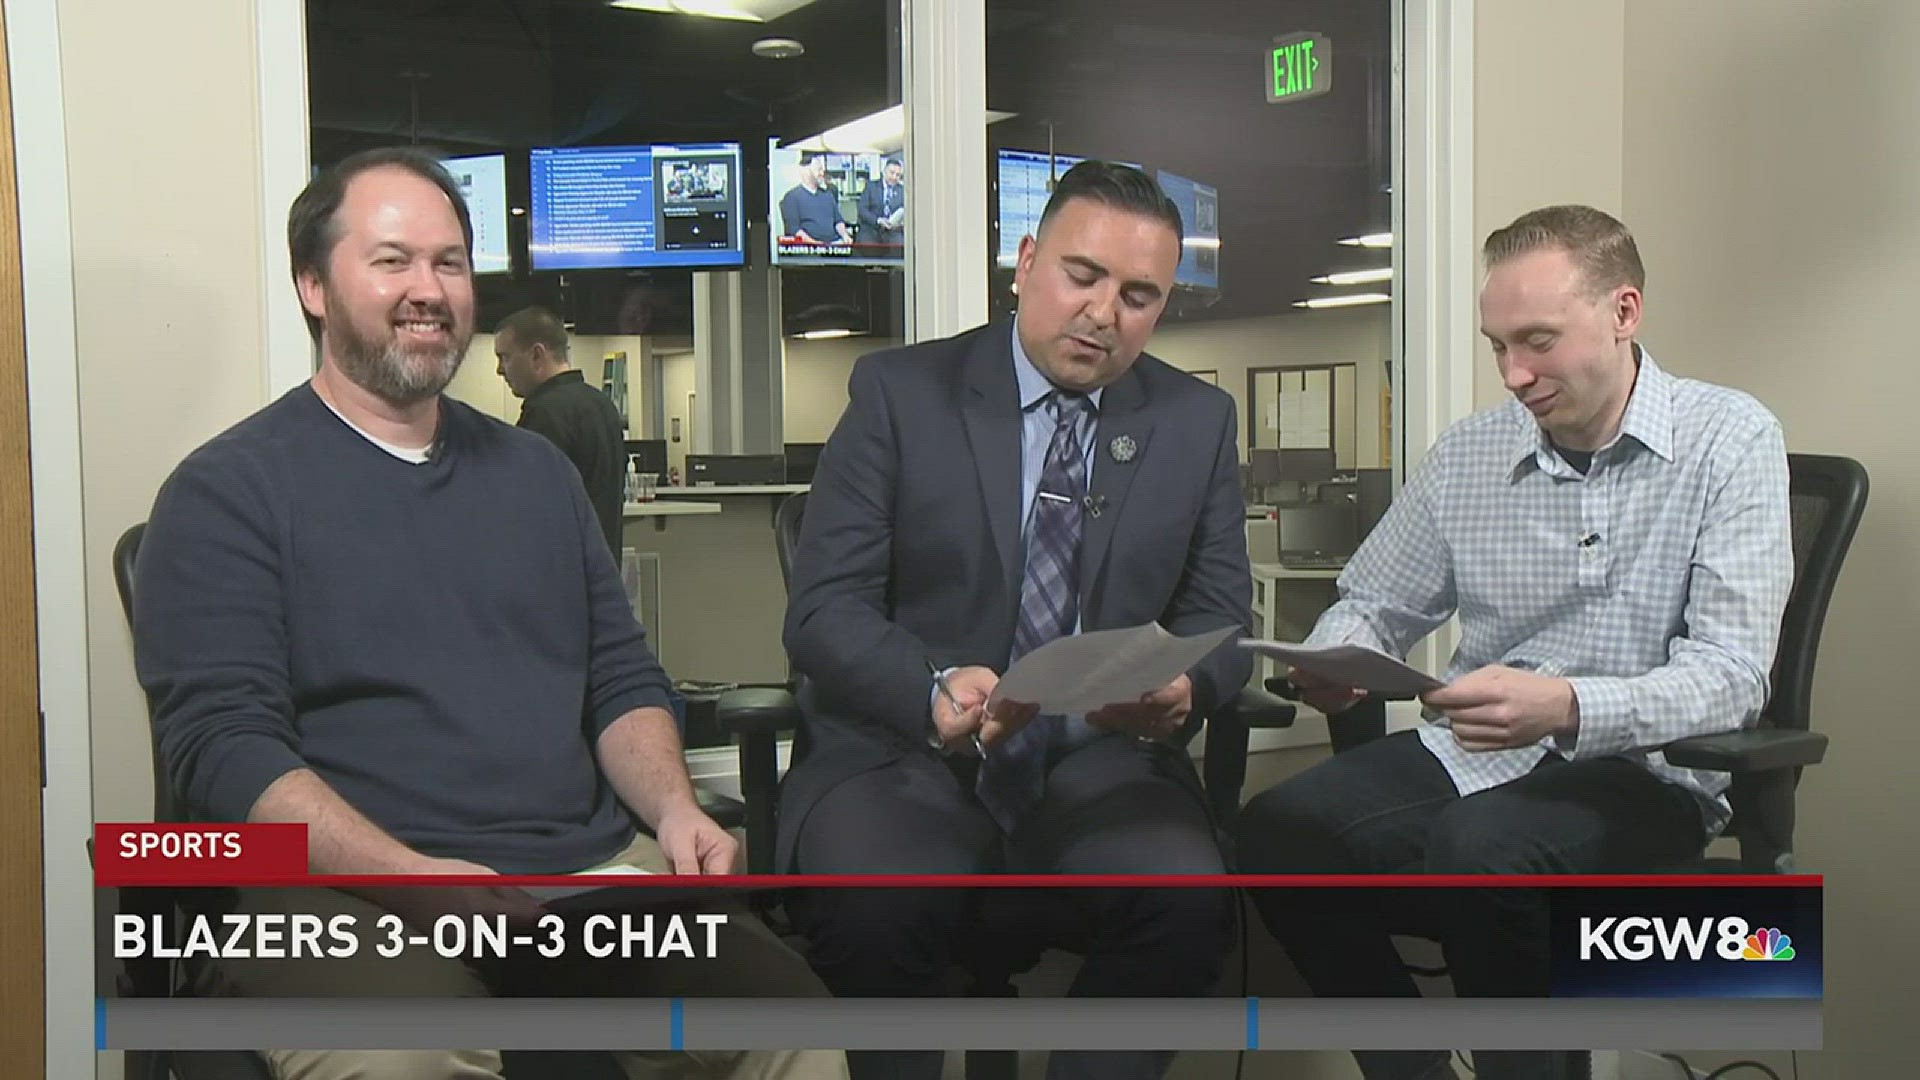 KGW's Jared Cowley, Orlando Sanchez and Nate Hanson make their predictions for the Blazers next three games, including a clash at the Moda Center against Jusuf Nurkic's old team.